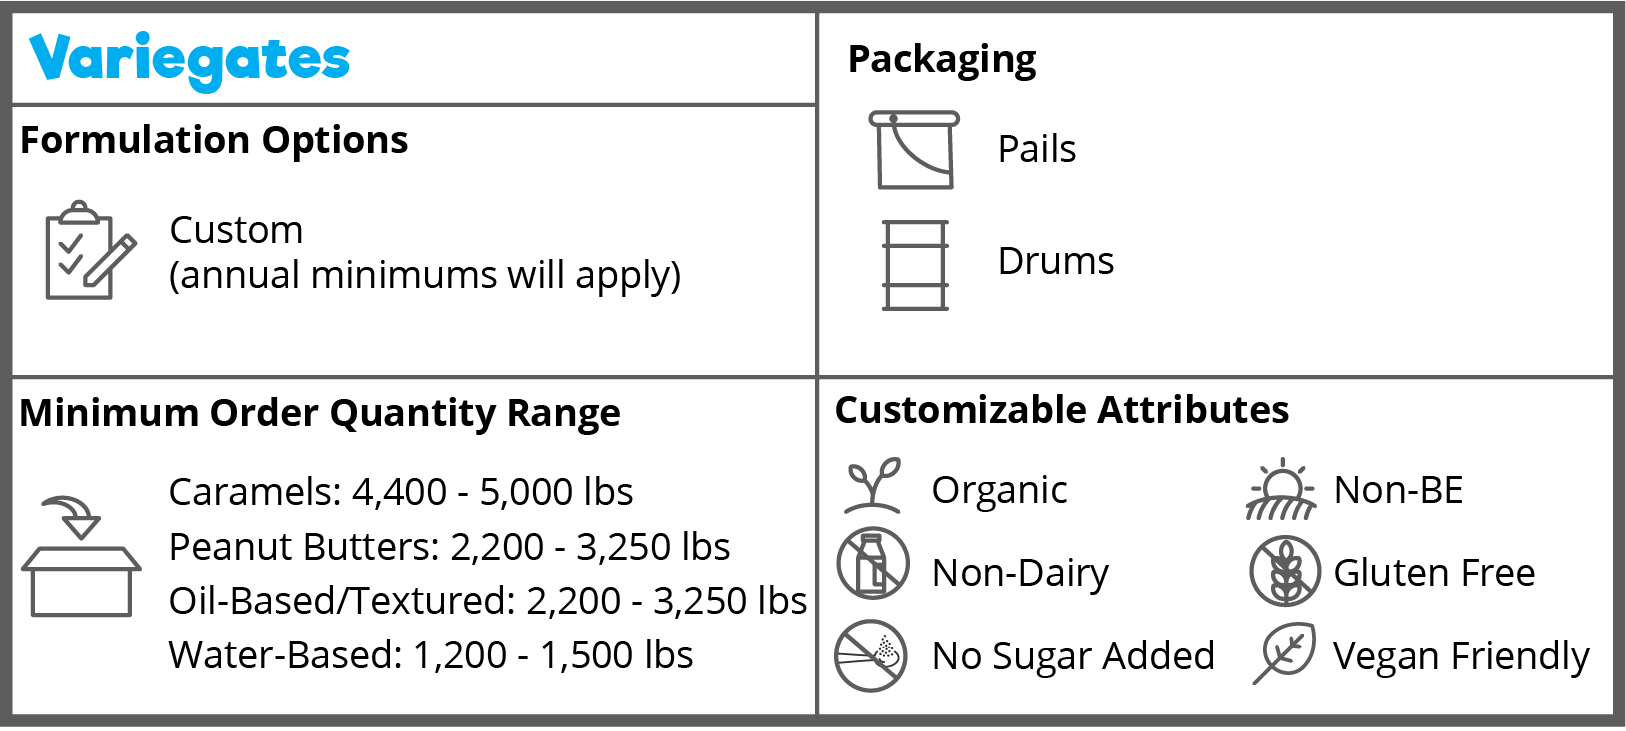 describes minimum order quantity ranges and attributes for denali caramels, peanut butters, and variegates